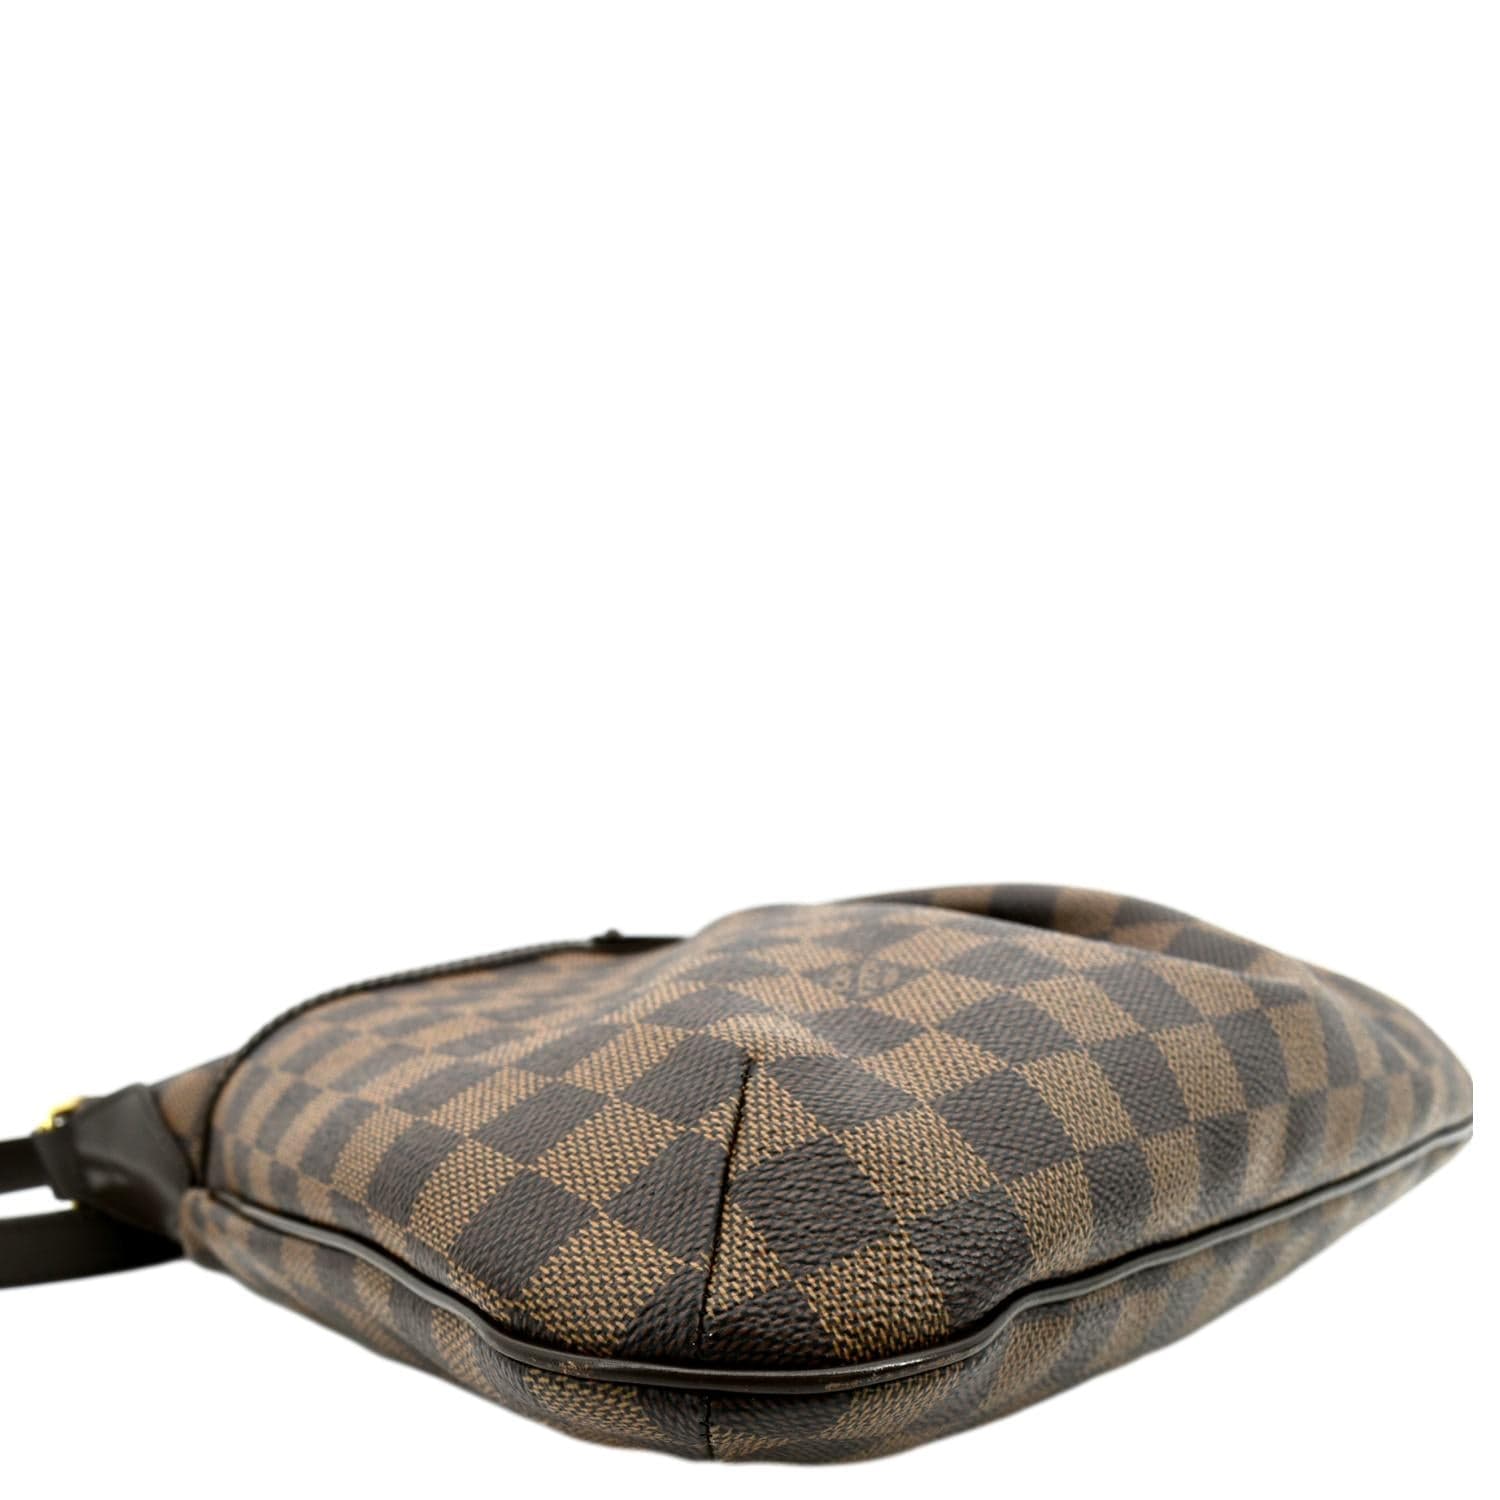 Louis+Vuitton+Bloomsbury+Crossbody+PM+Brown+Canvas for sale online